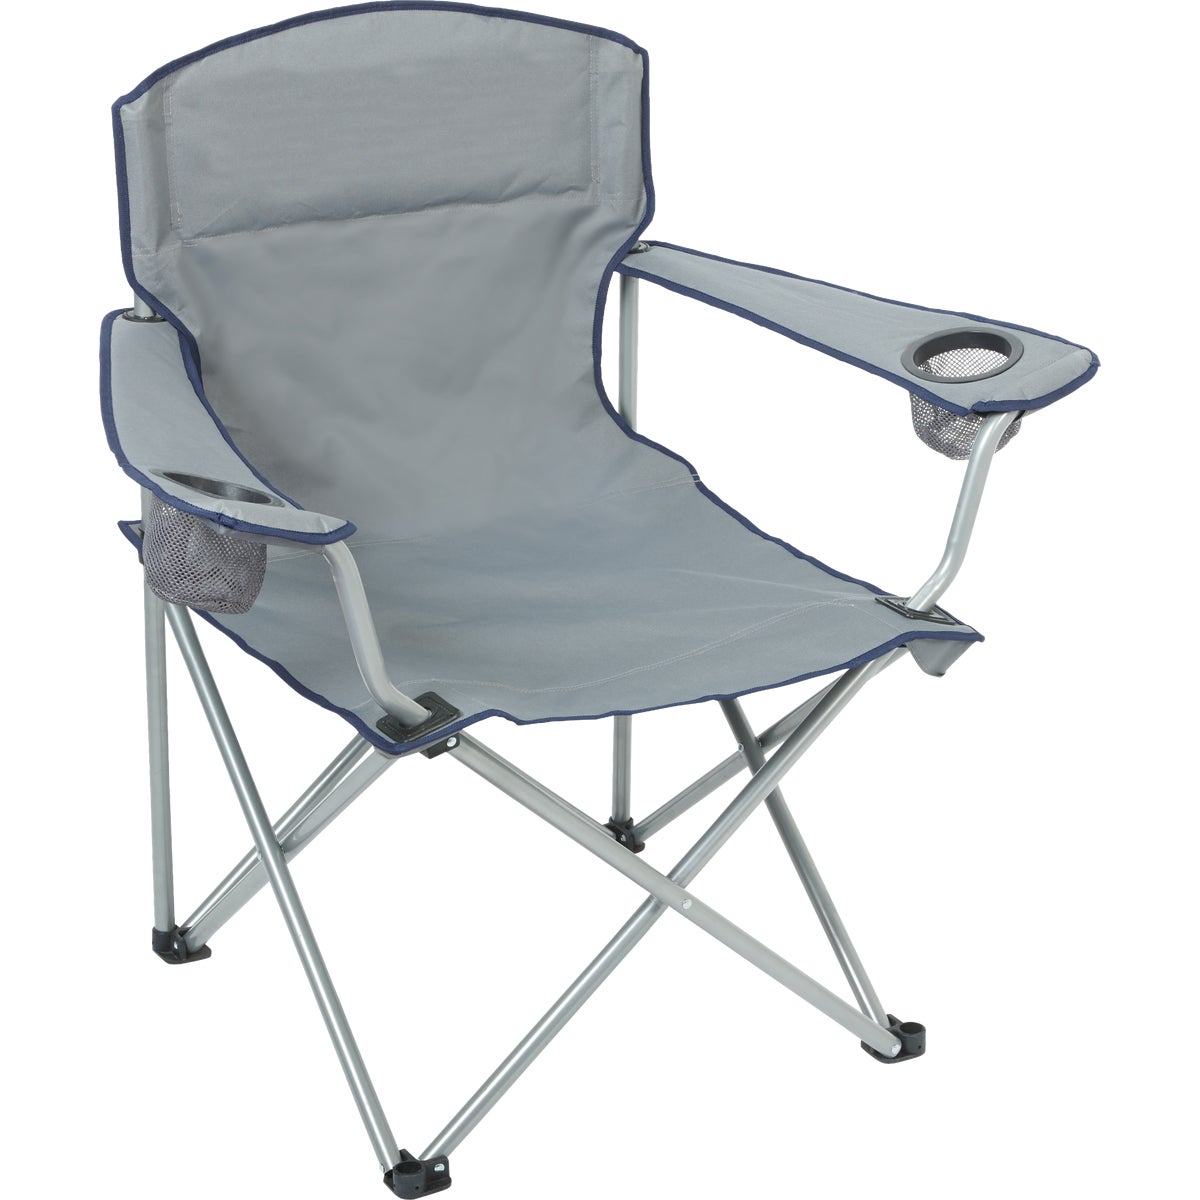 OVERSIZE CAMP CHAIR